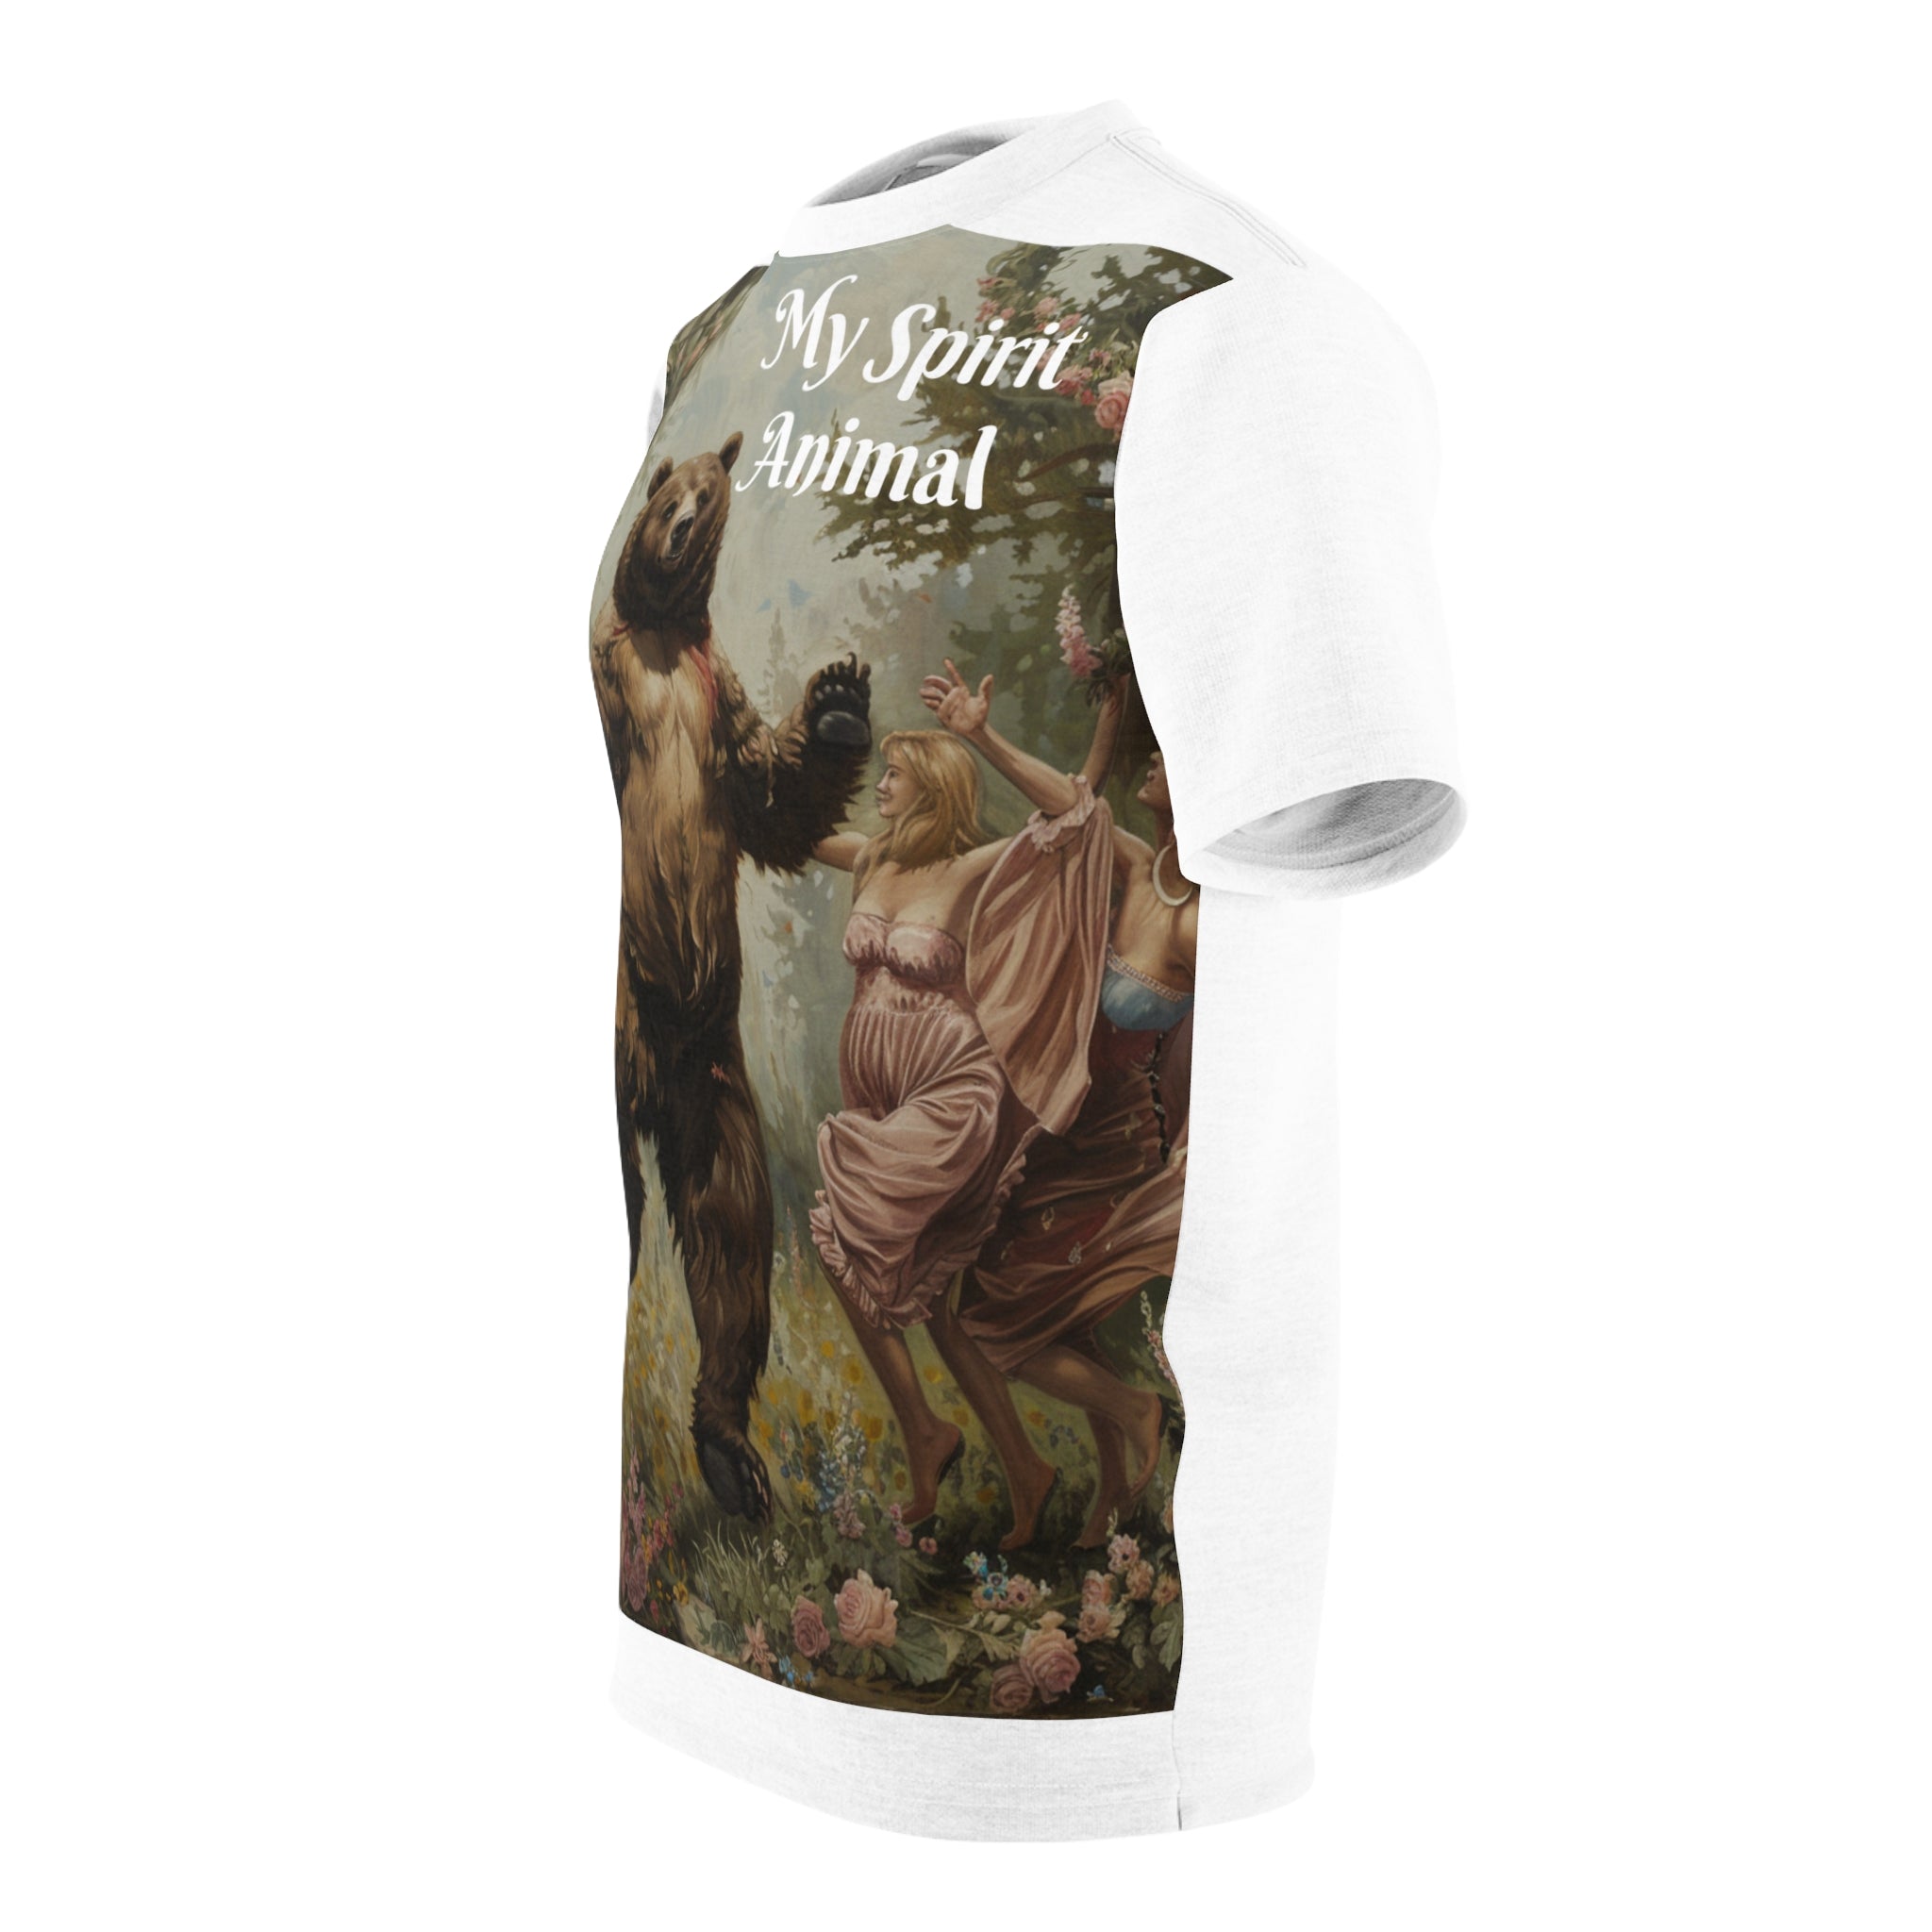 The image features a vibrant and artistically rich unisex tee showcasing a full-body, seamless print of a bear joyfully interacting with nymphs in a lush forest setting. The tee's cut and sew construction ensures the scene wraps beautifully around the shirt, enhancing both the visual impact and the storytelling element.